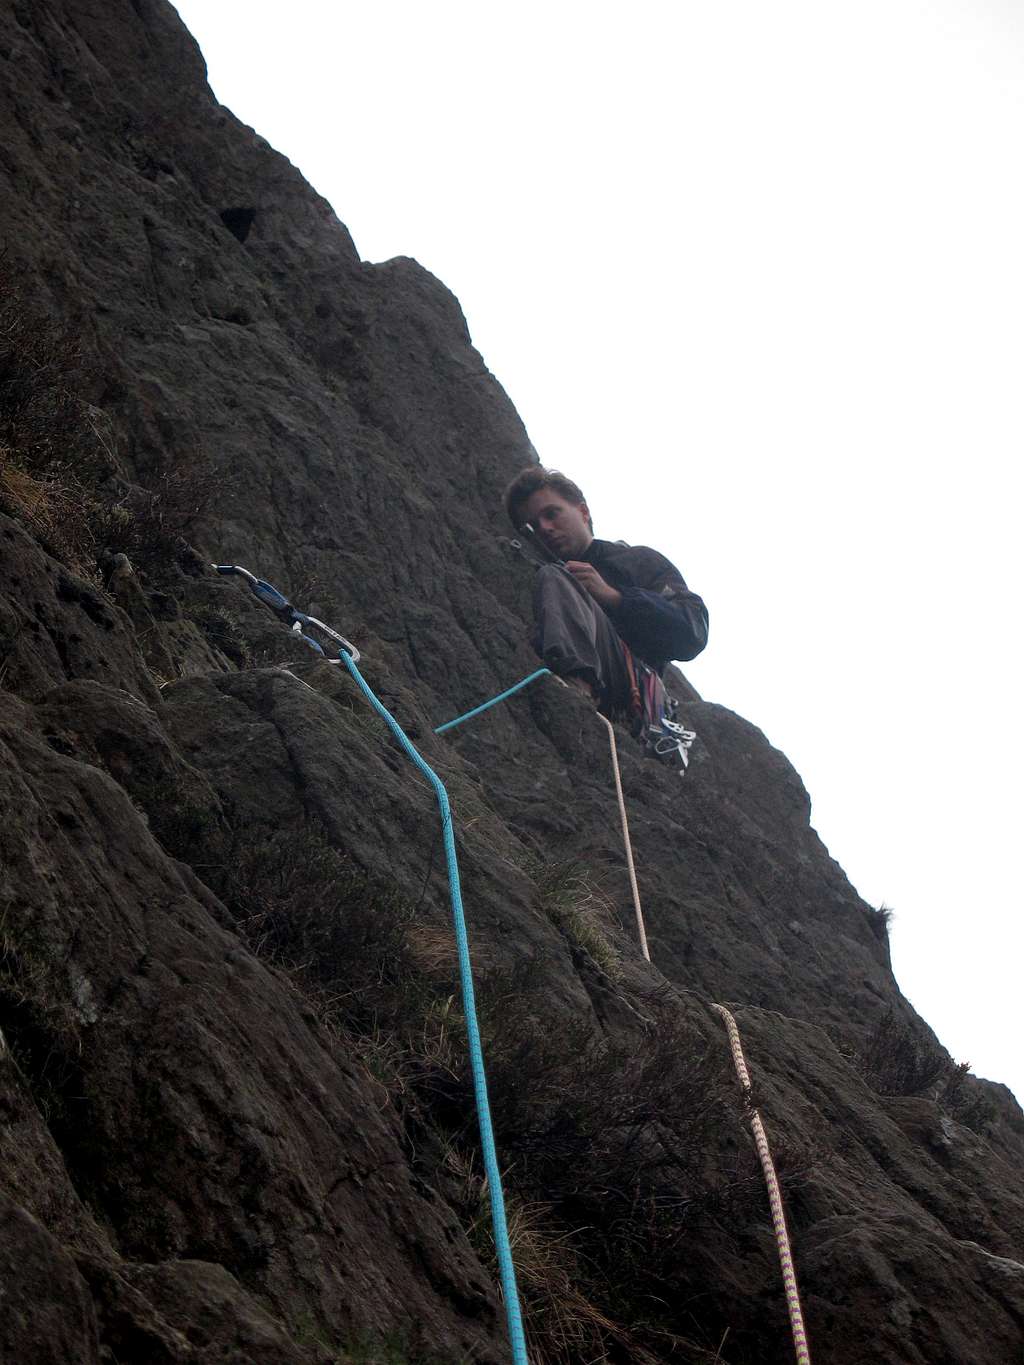 Tom leading the 2nd pitch of Avalanche/Red Wall/ Longlands Continuation